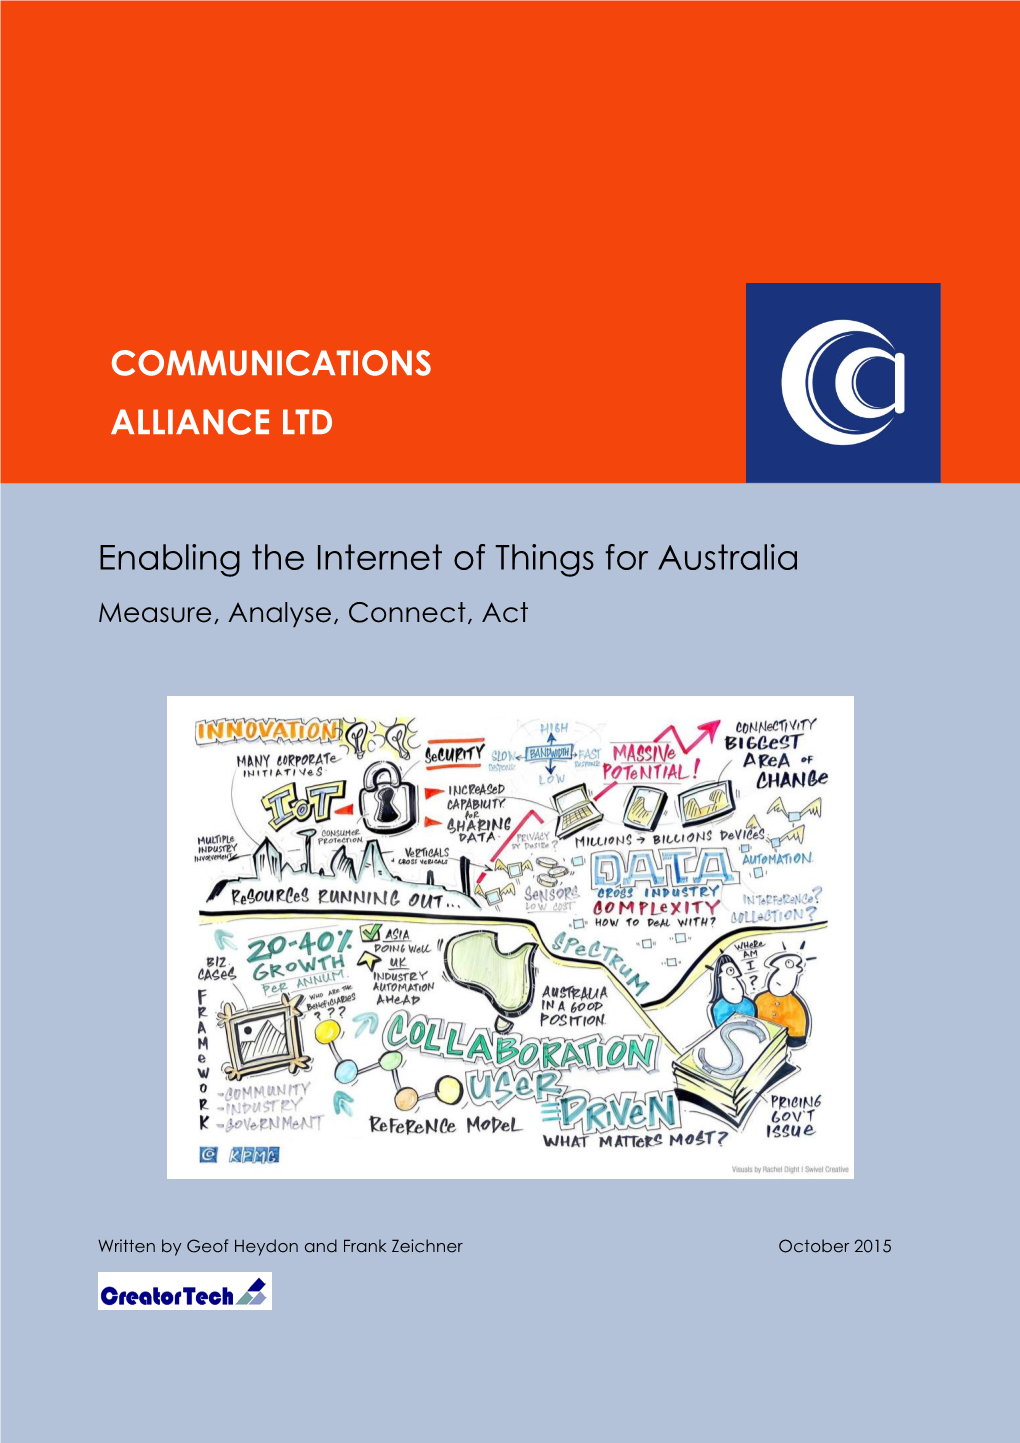 Enabling the Internet of Things for Australia Measure, Analyse, Connect, Act